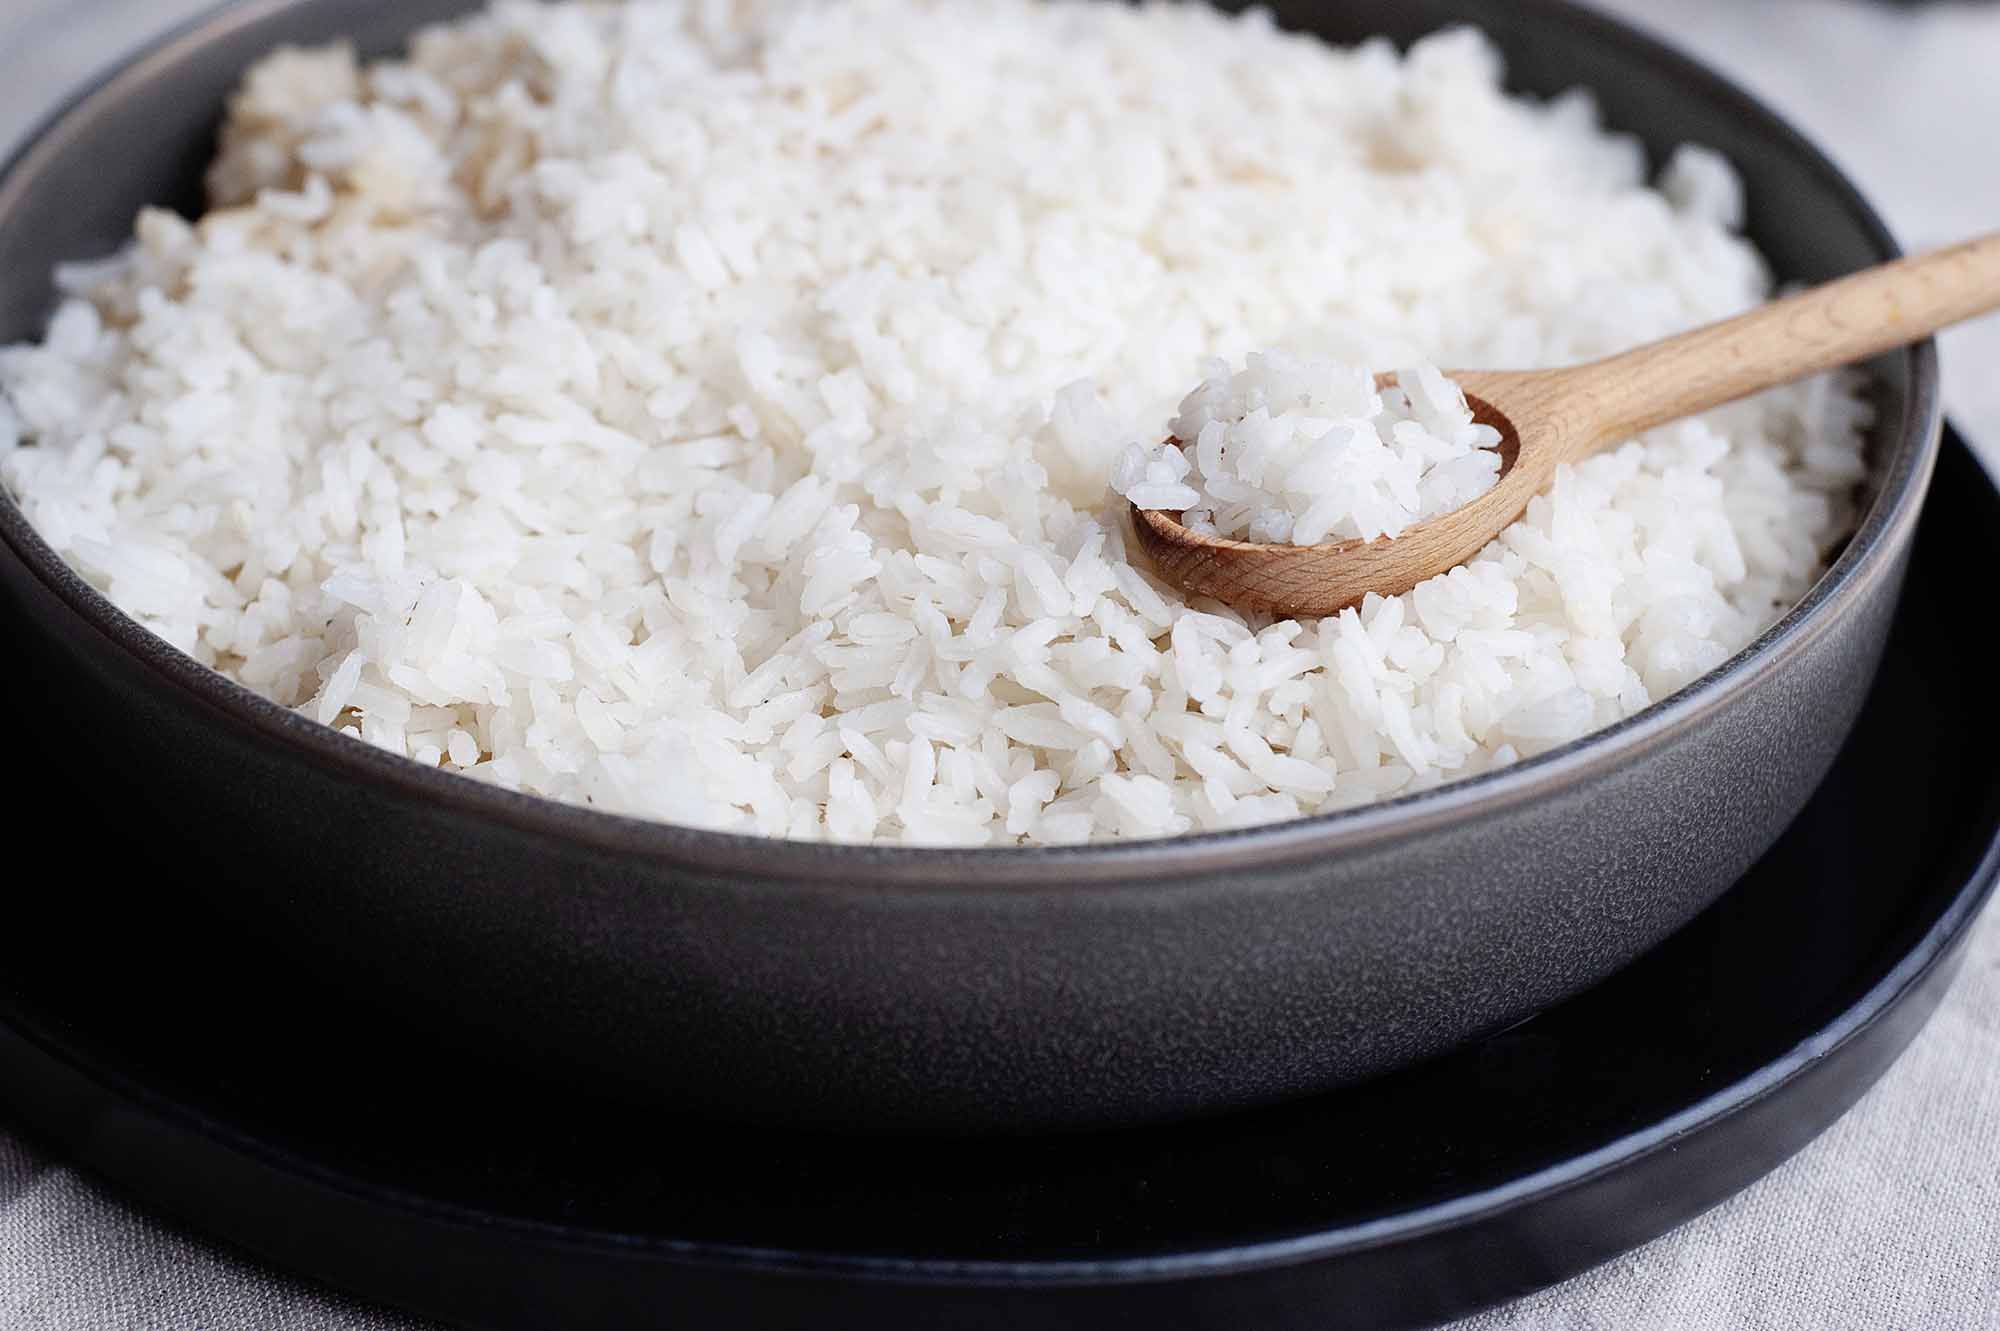 How to Make White Rice Healthy